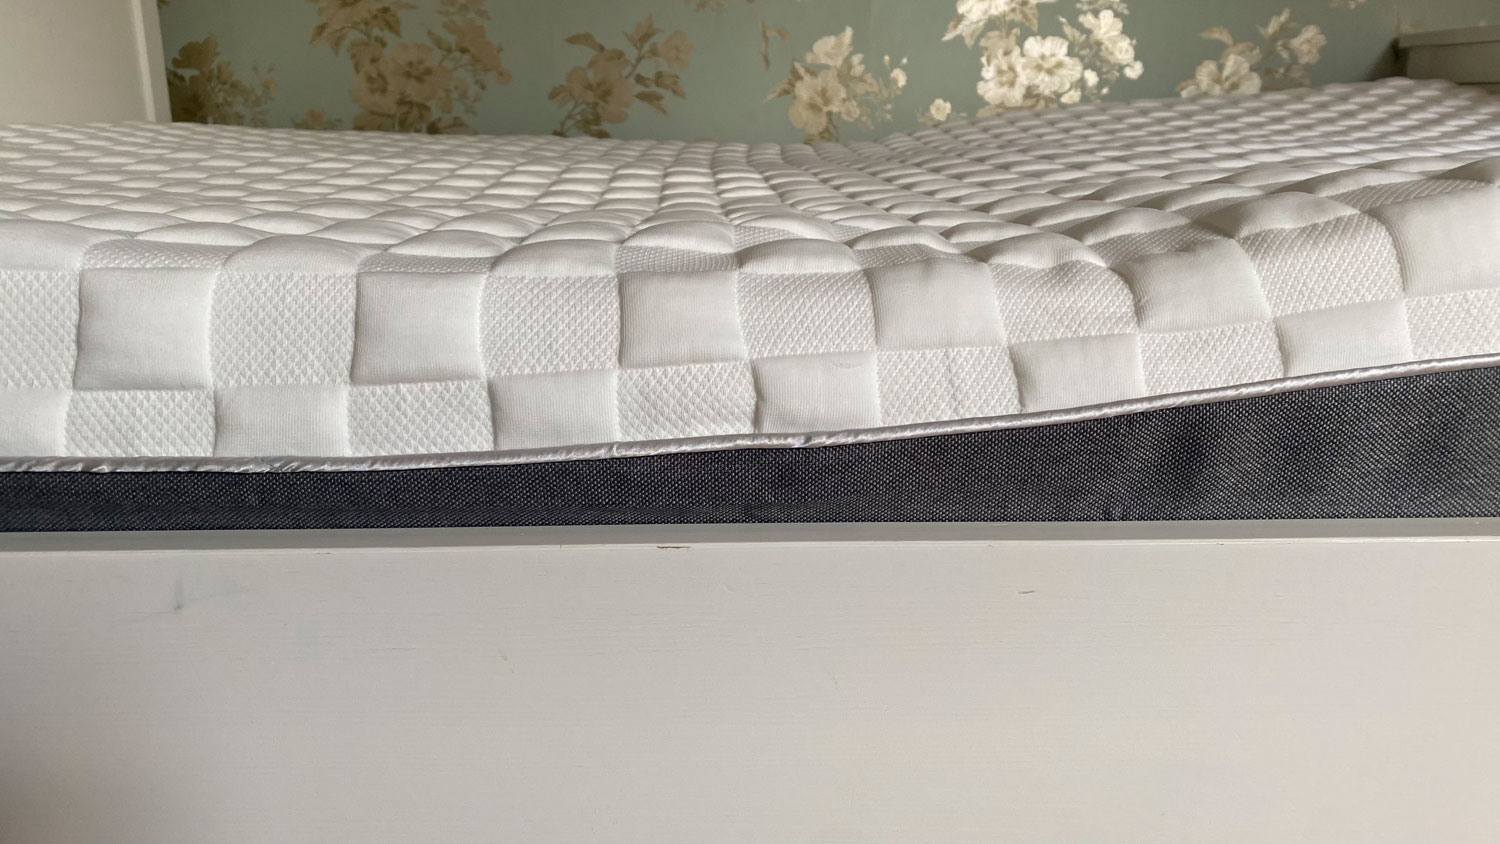 The Levitex Gravity Defying Mattress just after being opened